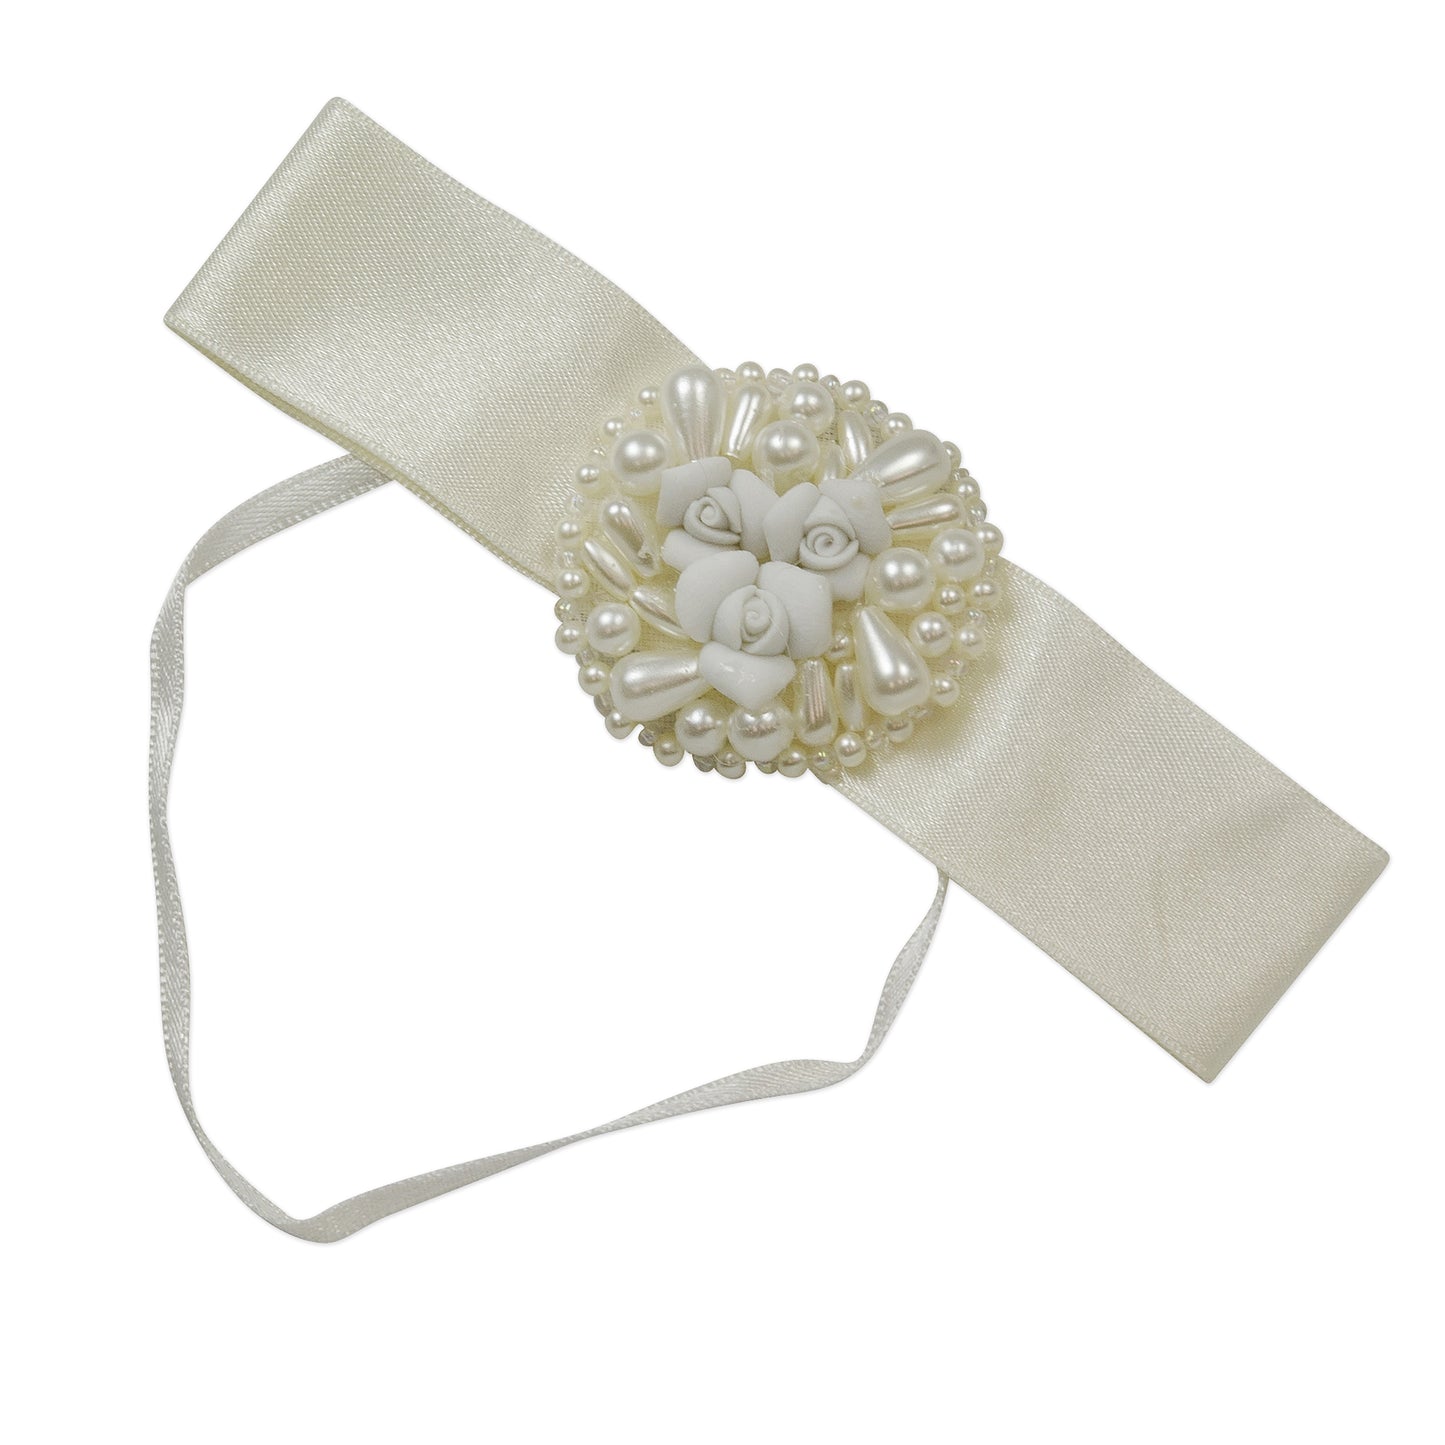 Vintage Bridal Bow with Pearls and Flower Applique  - Ivory